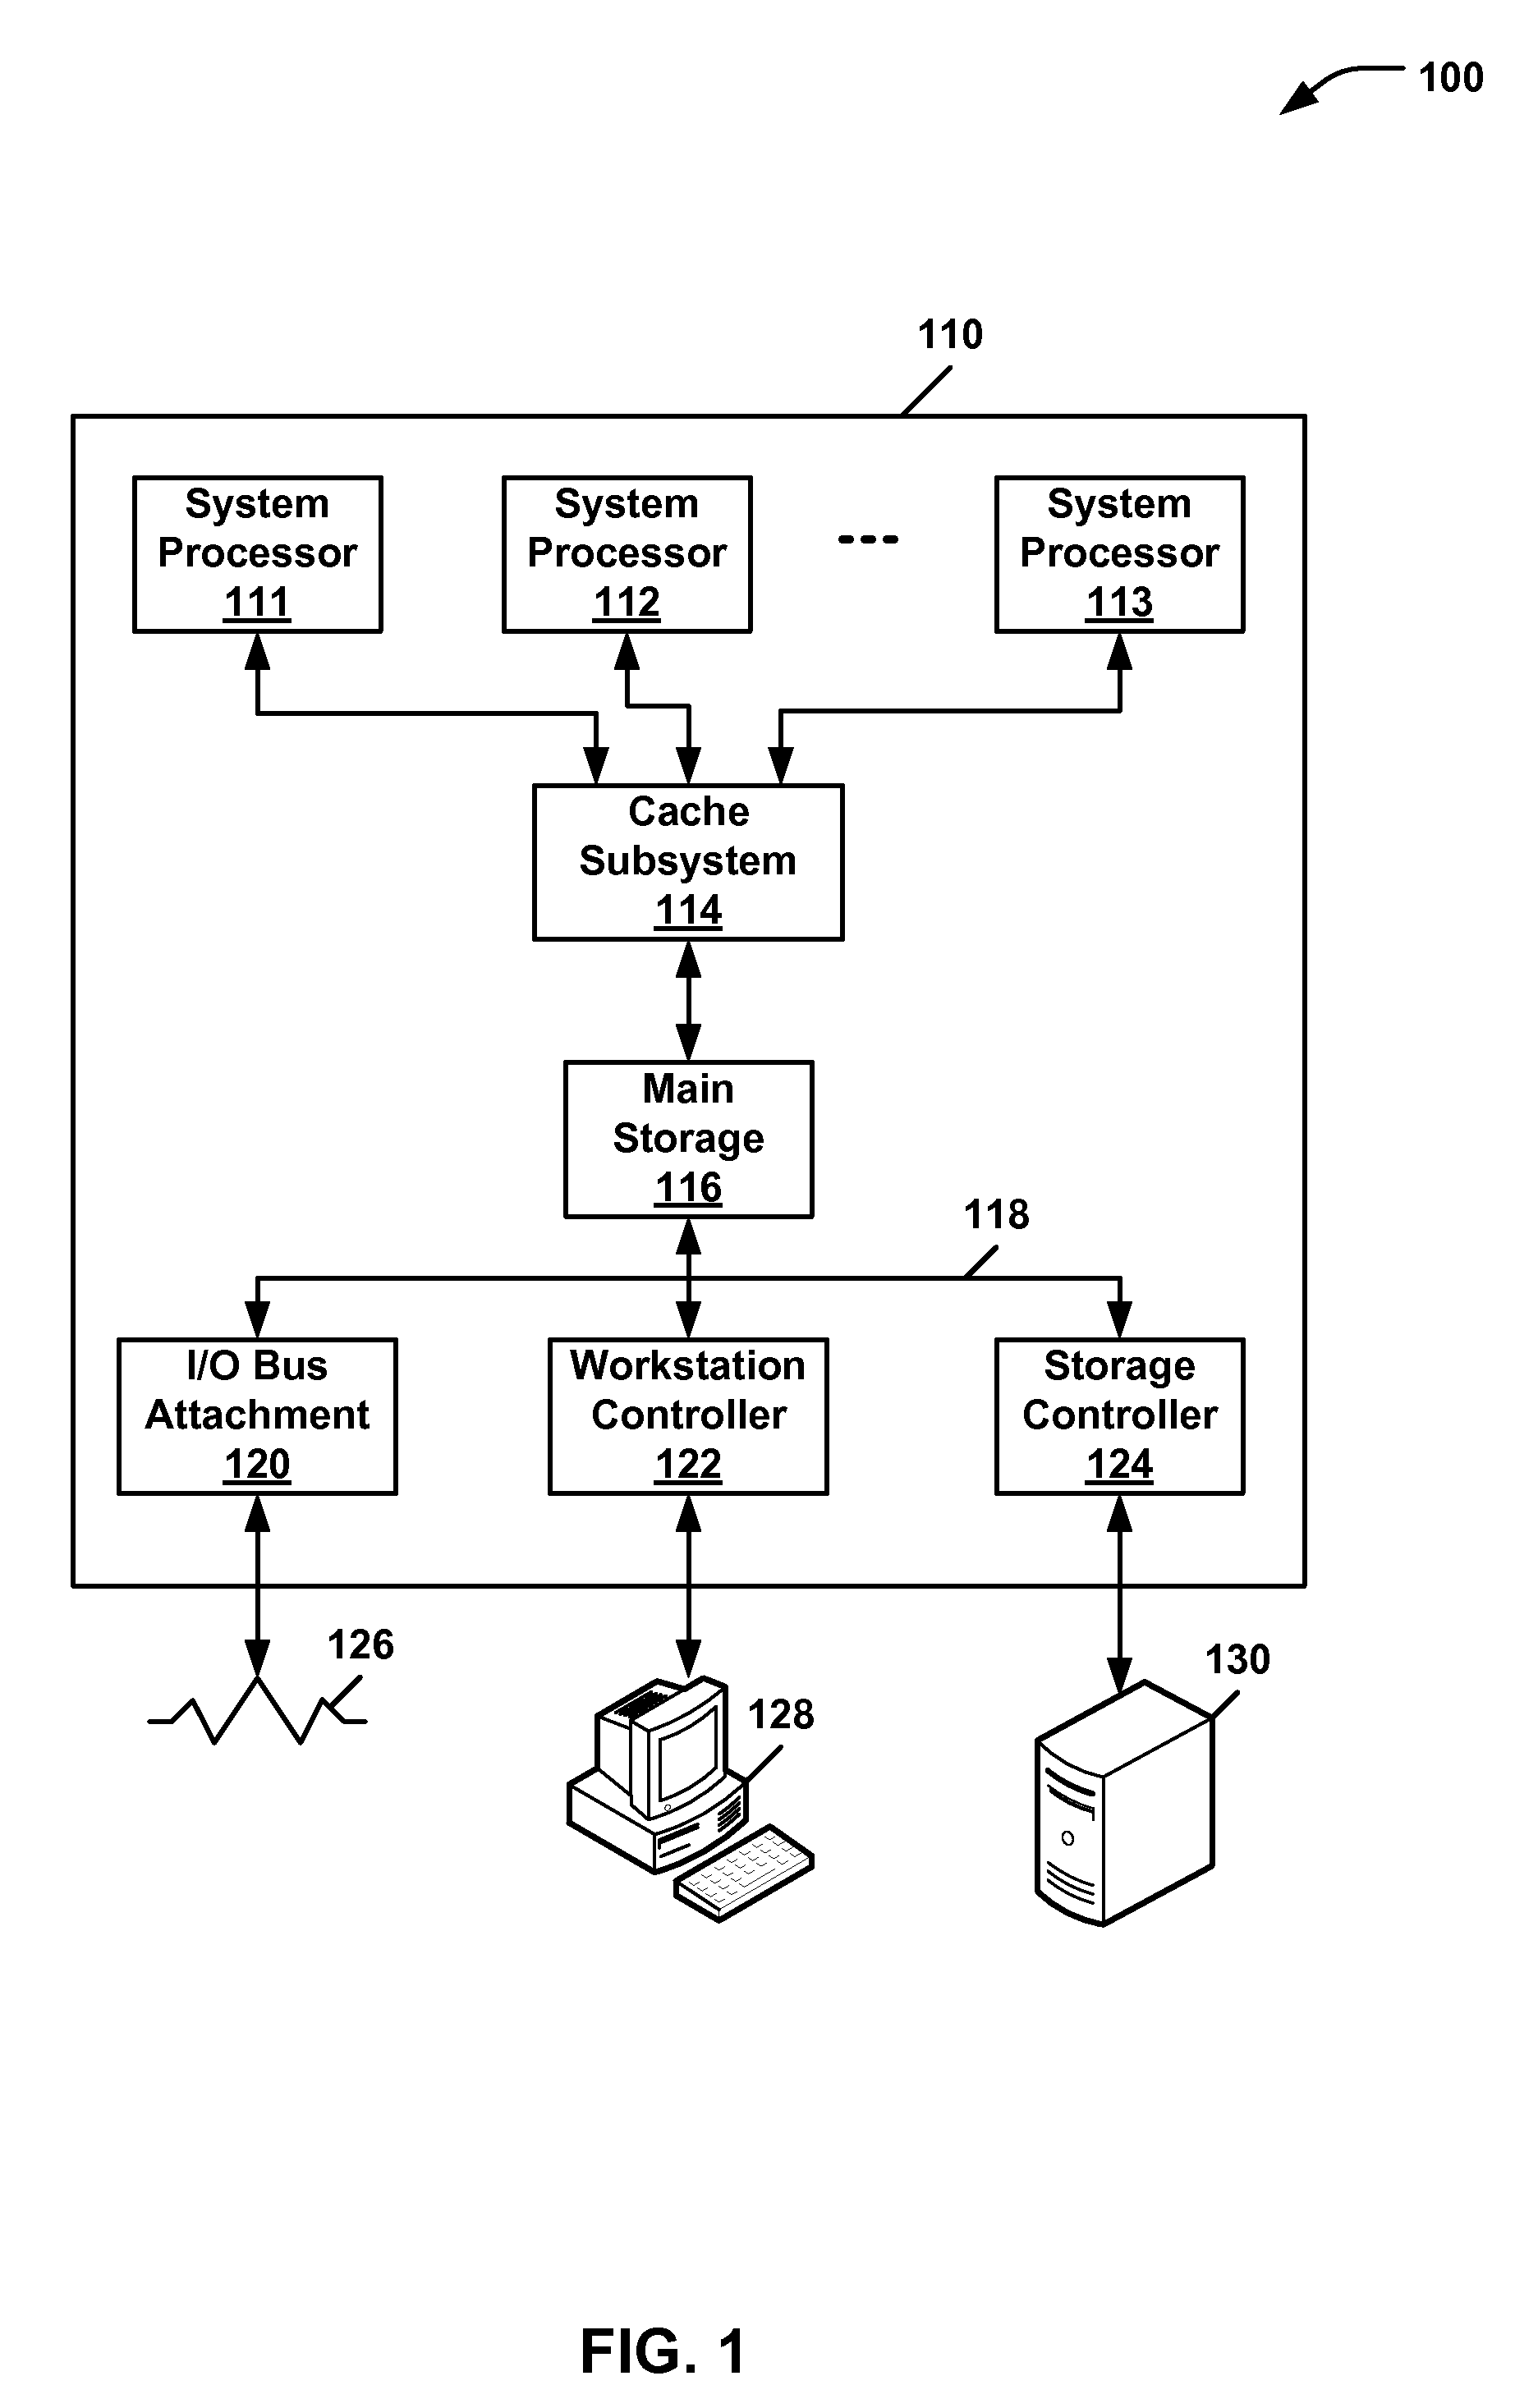 Partitioned scan chain diagnostics using multiple bypass structures and injection points